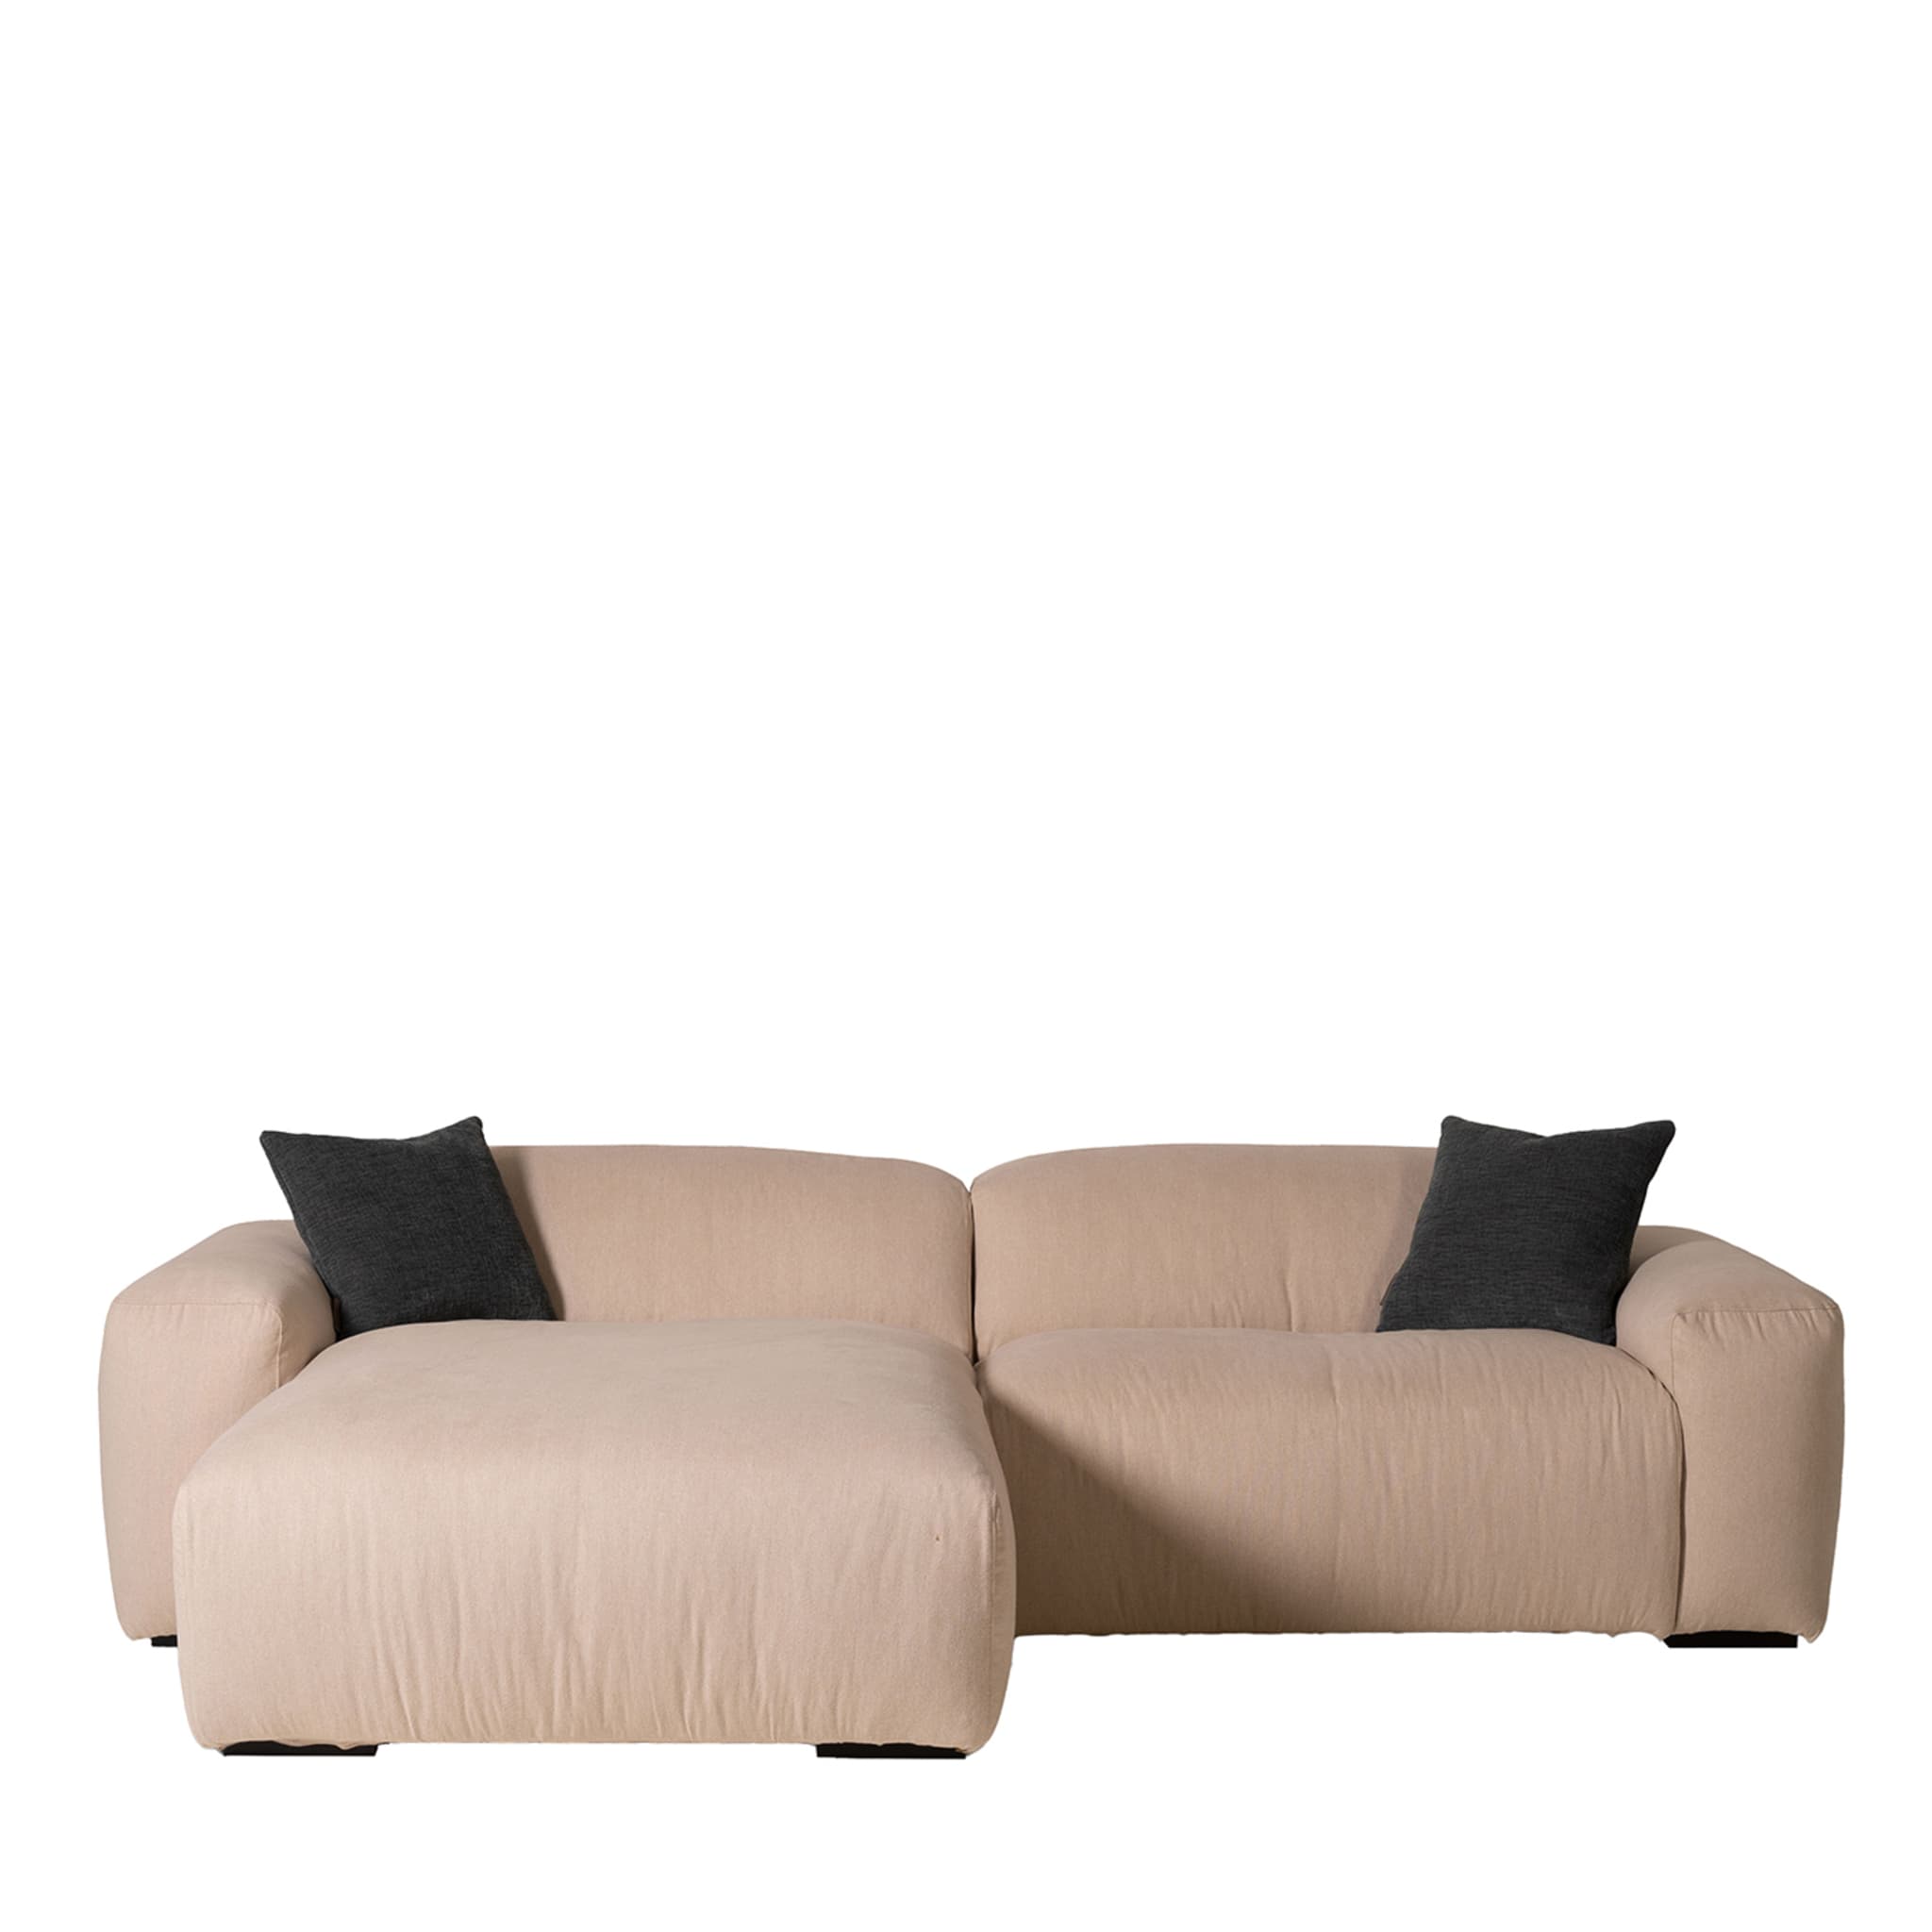 Lazy Beige 3-Seater Sofa by Marco & Giulio Mantellassi - Main view